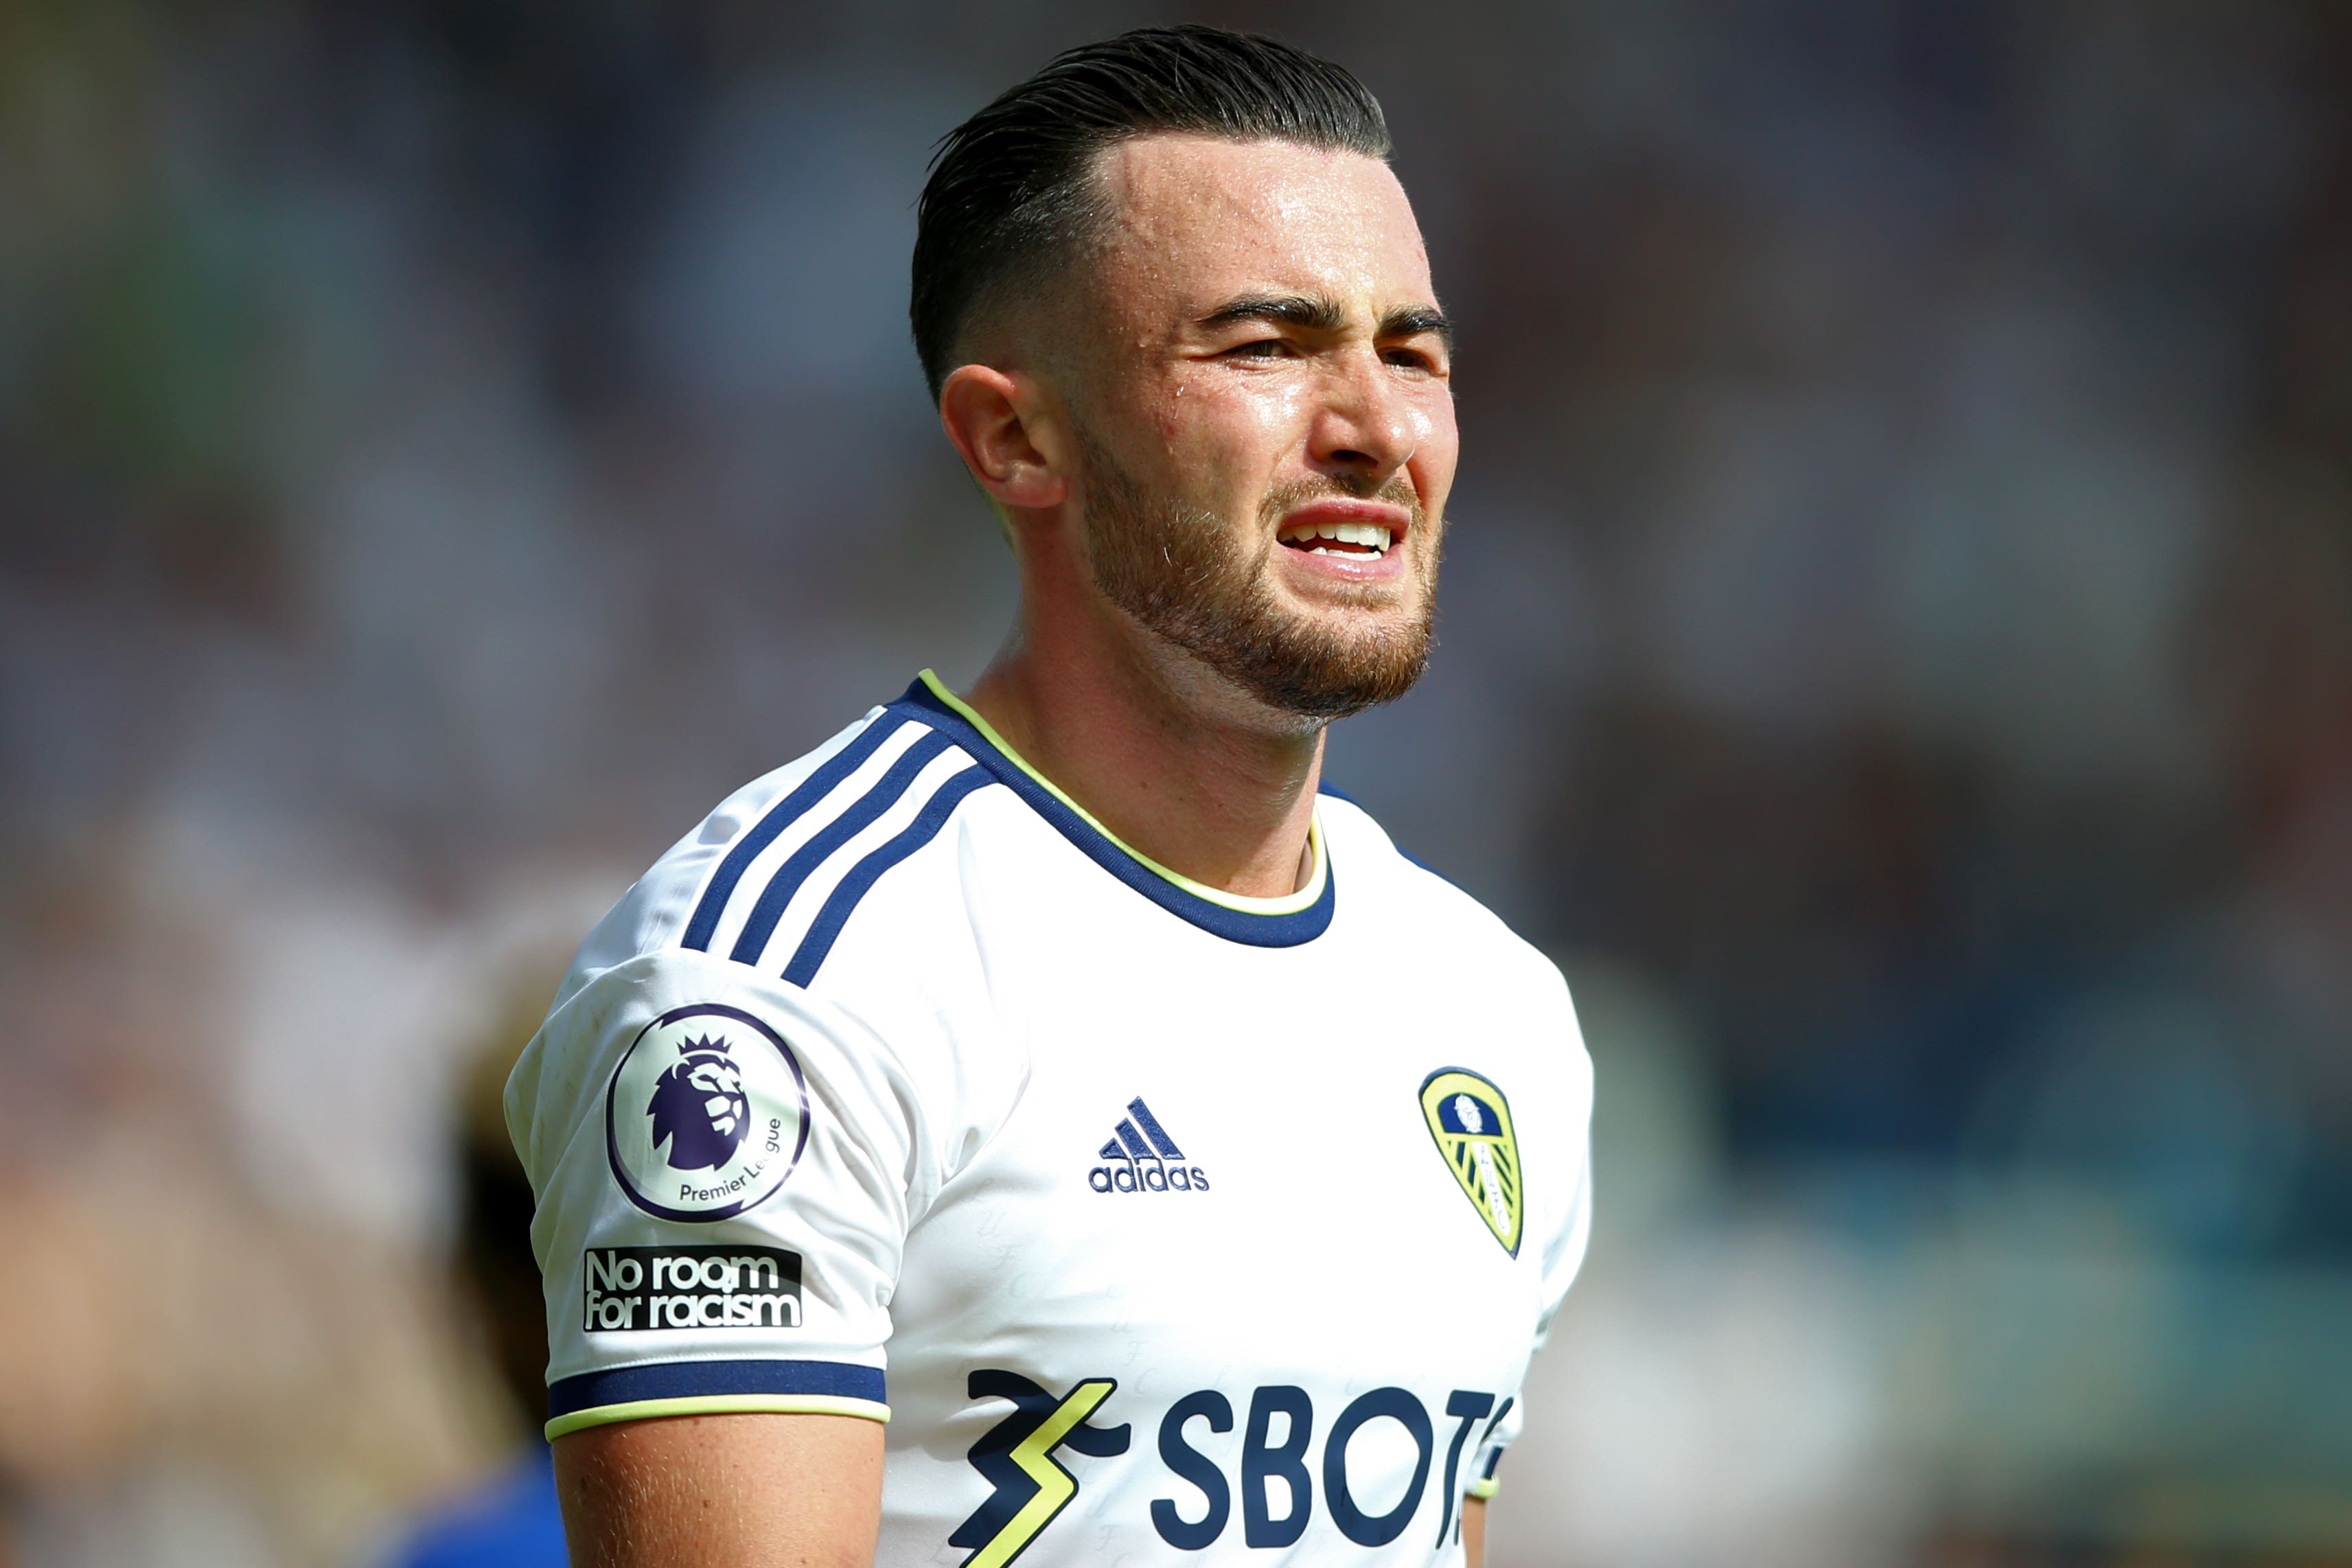 Jack Harrison is set to move to Goodison Park